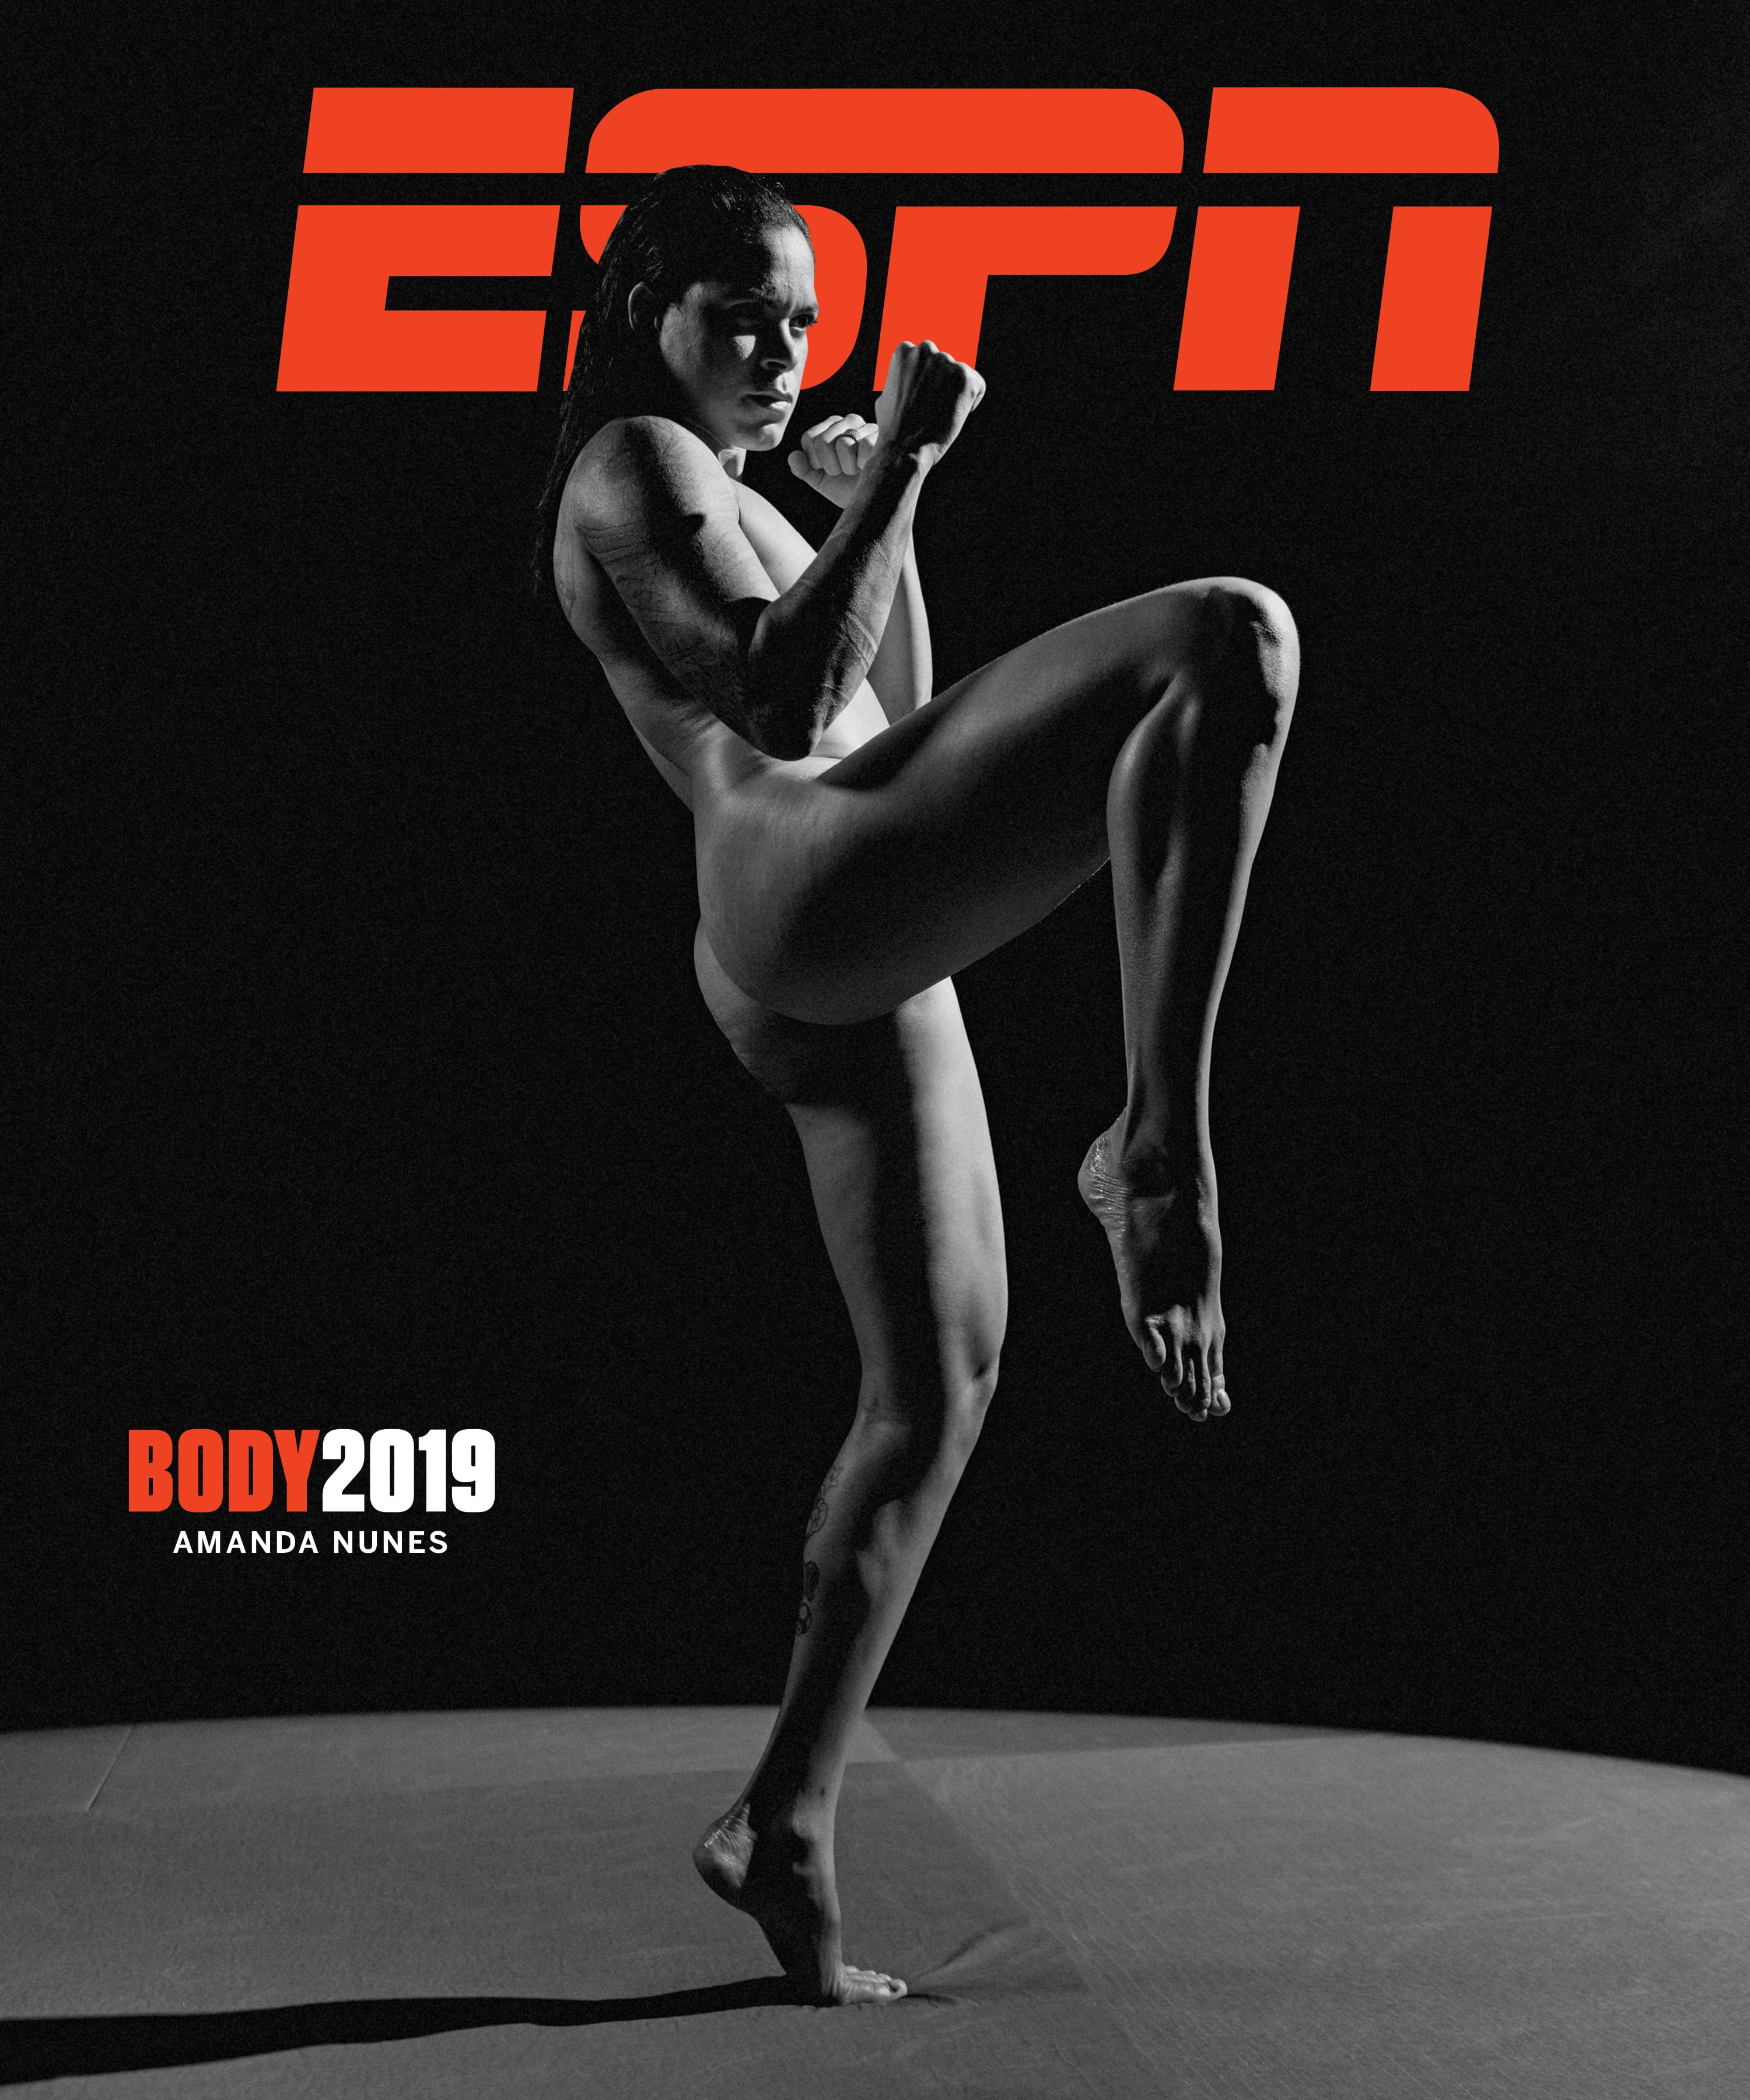 ESPN 'Body Issue' athletes with local ties